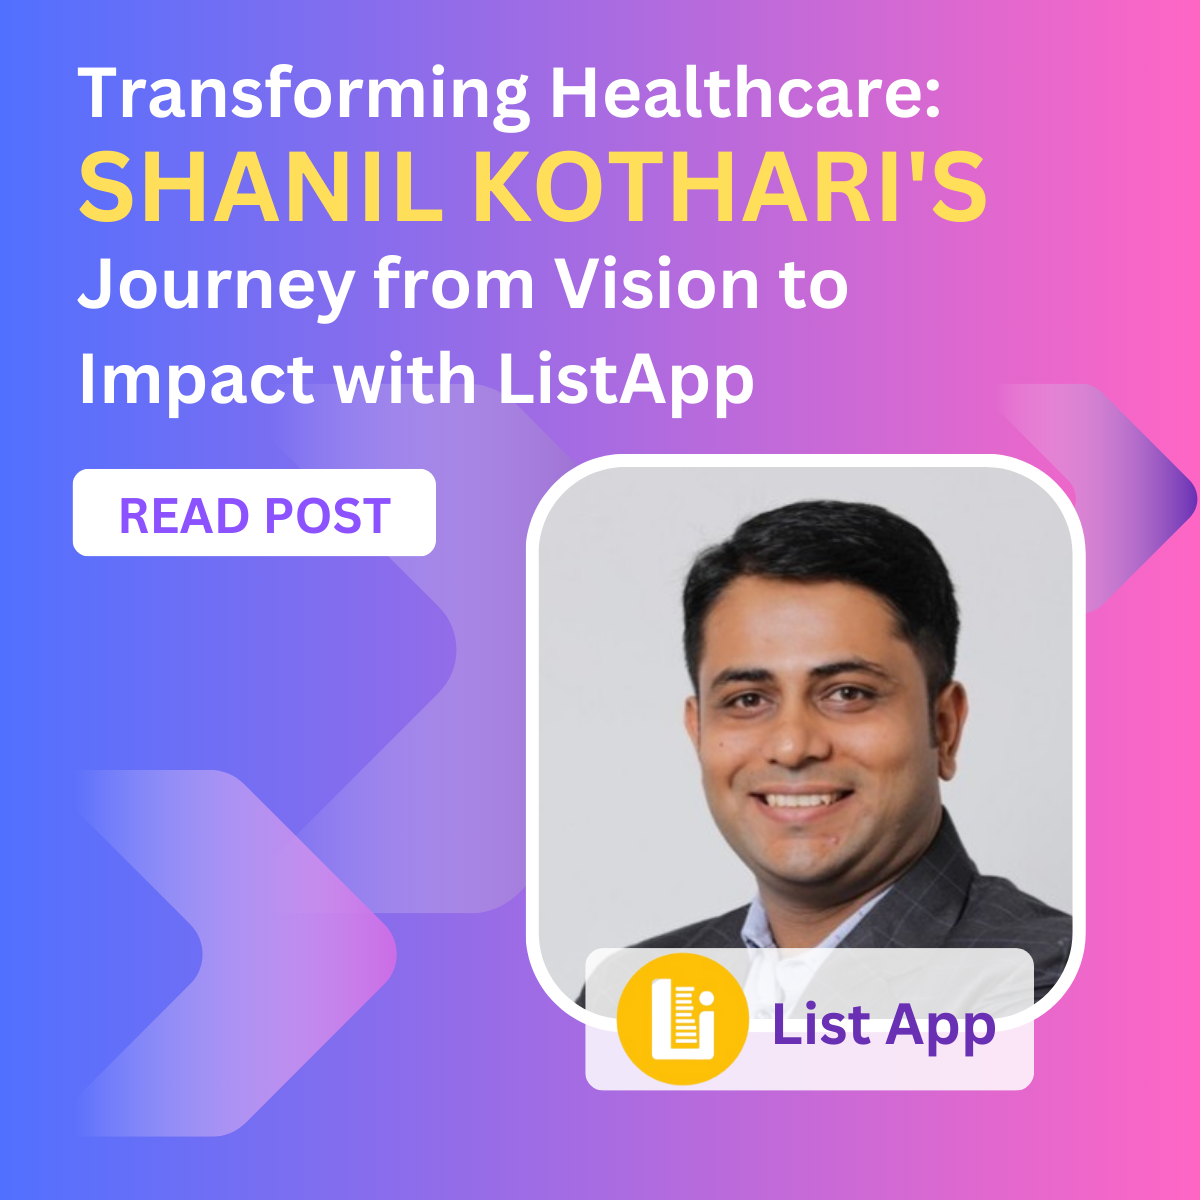 Transforming Healthcare: Journey from Vision to Impact with ListApp